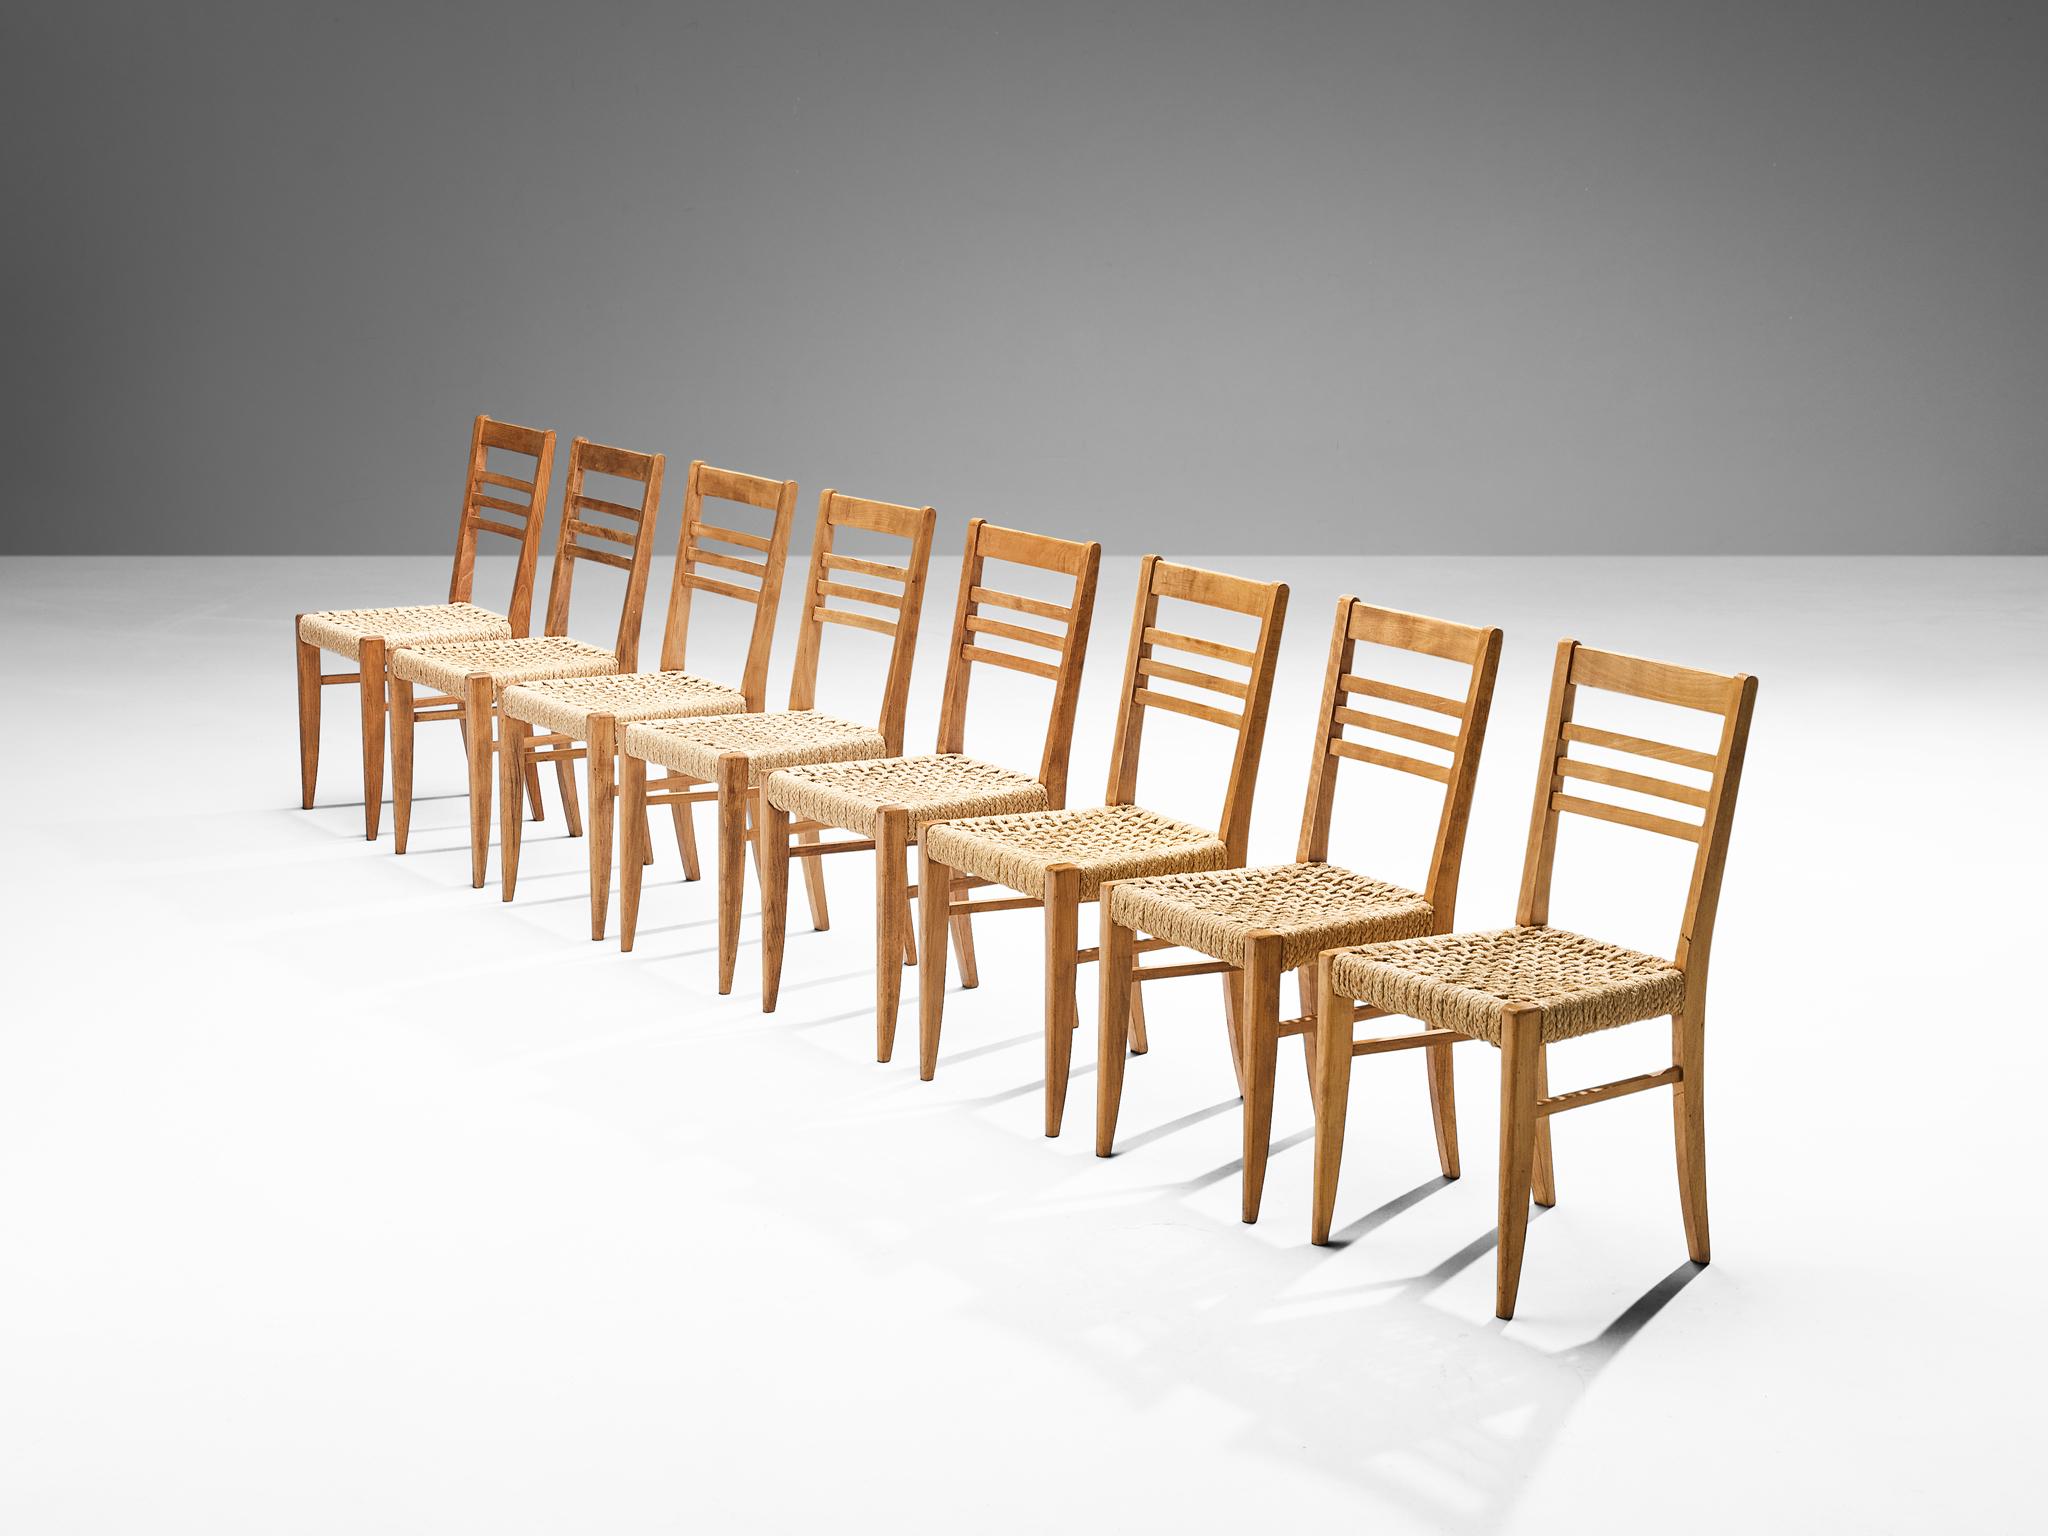 Adrien Audoux and Frida Minet for Vibo, set of eight armchairs, beech, rope hemp, France, late 1940s 

Set of eight naturalistic dining chairs designed by Adrien Audoux and Frida Minet. The seats are made of woven hemp from the abaca plant which is